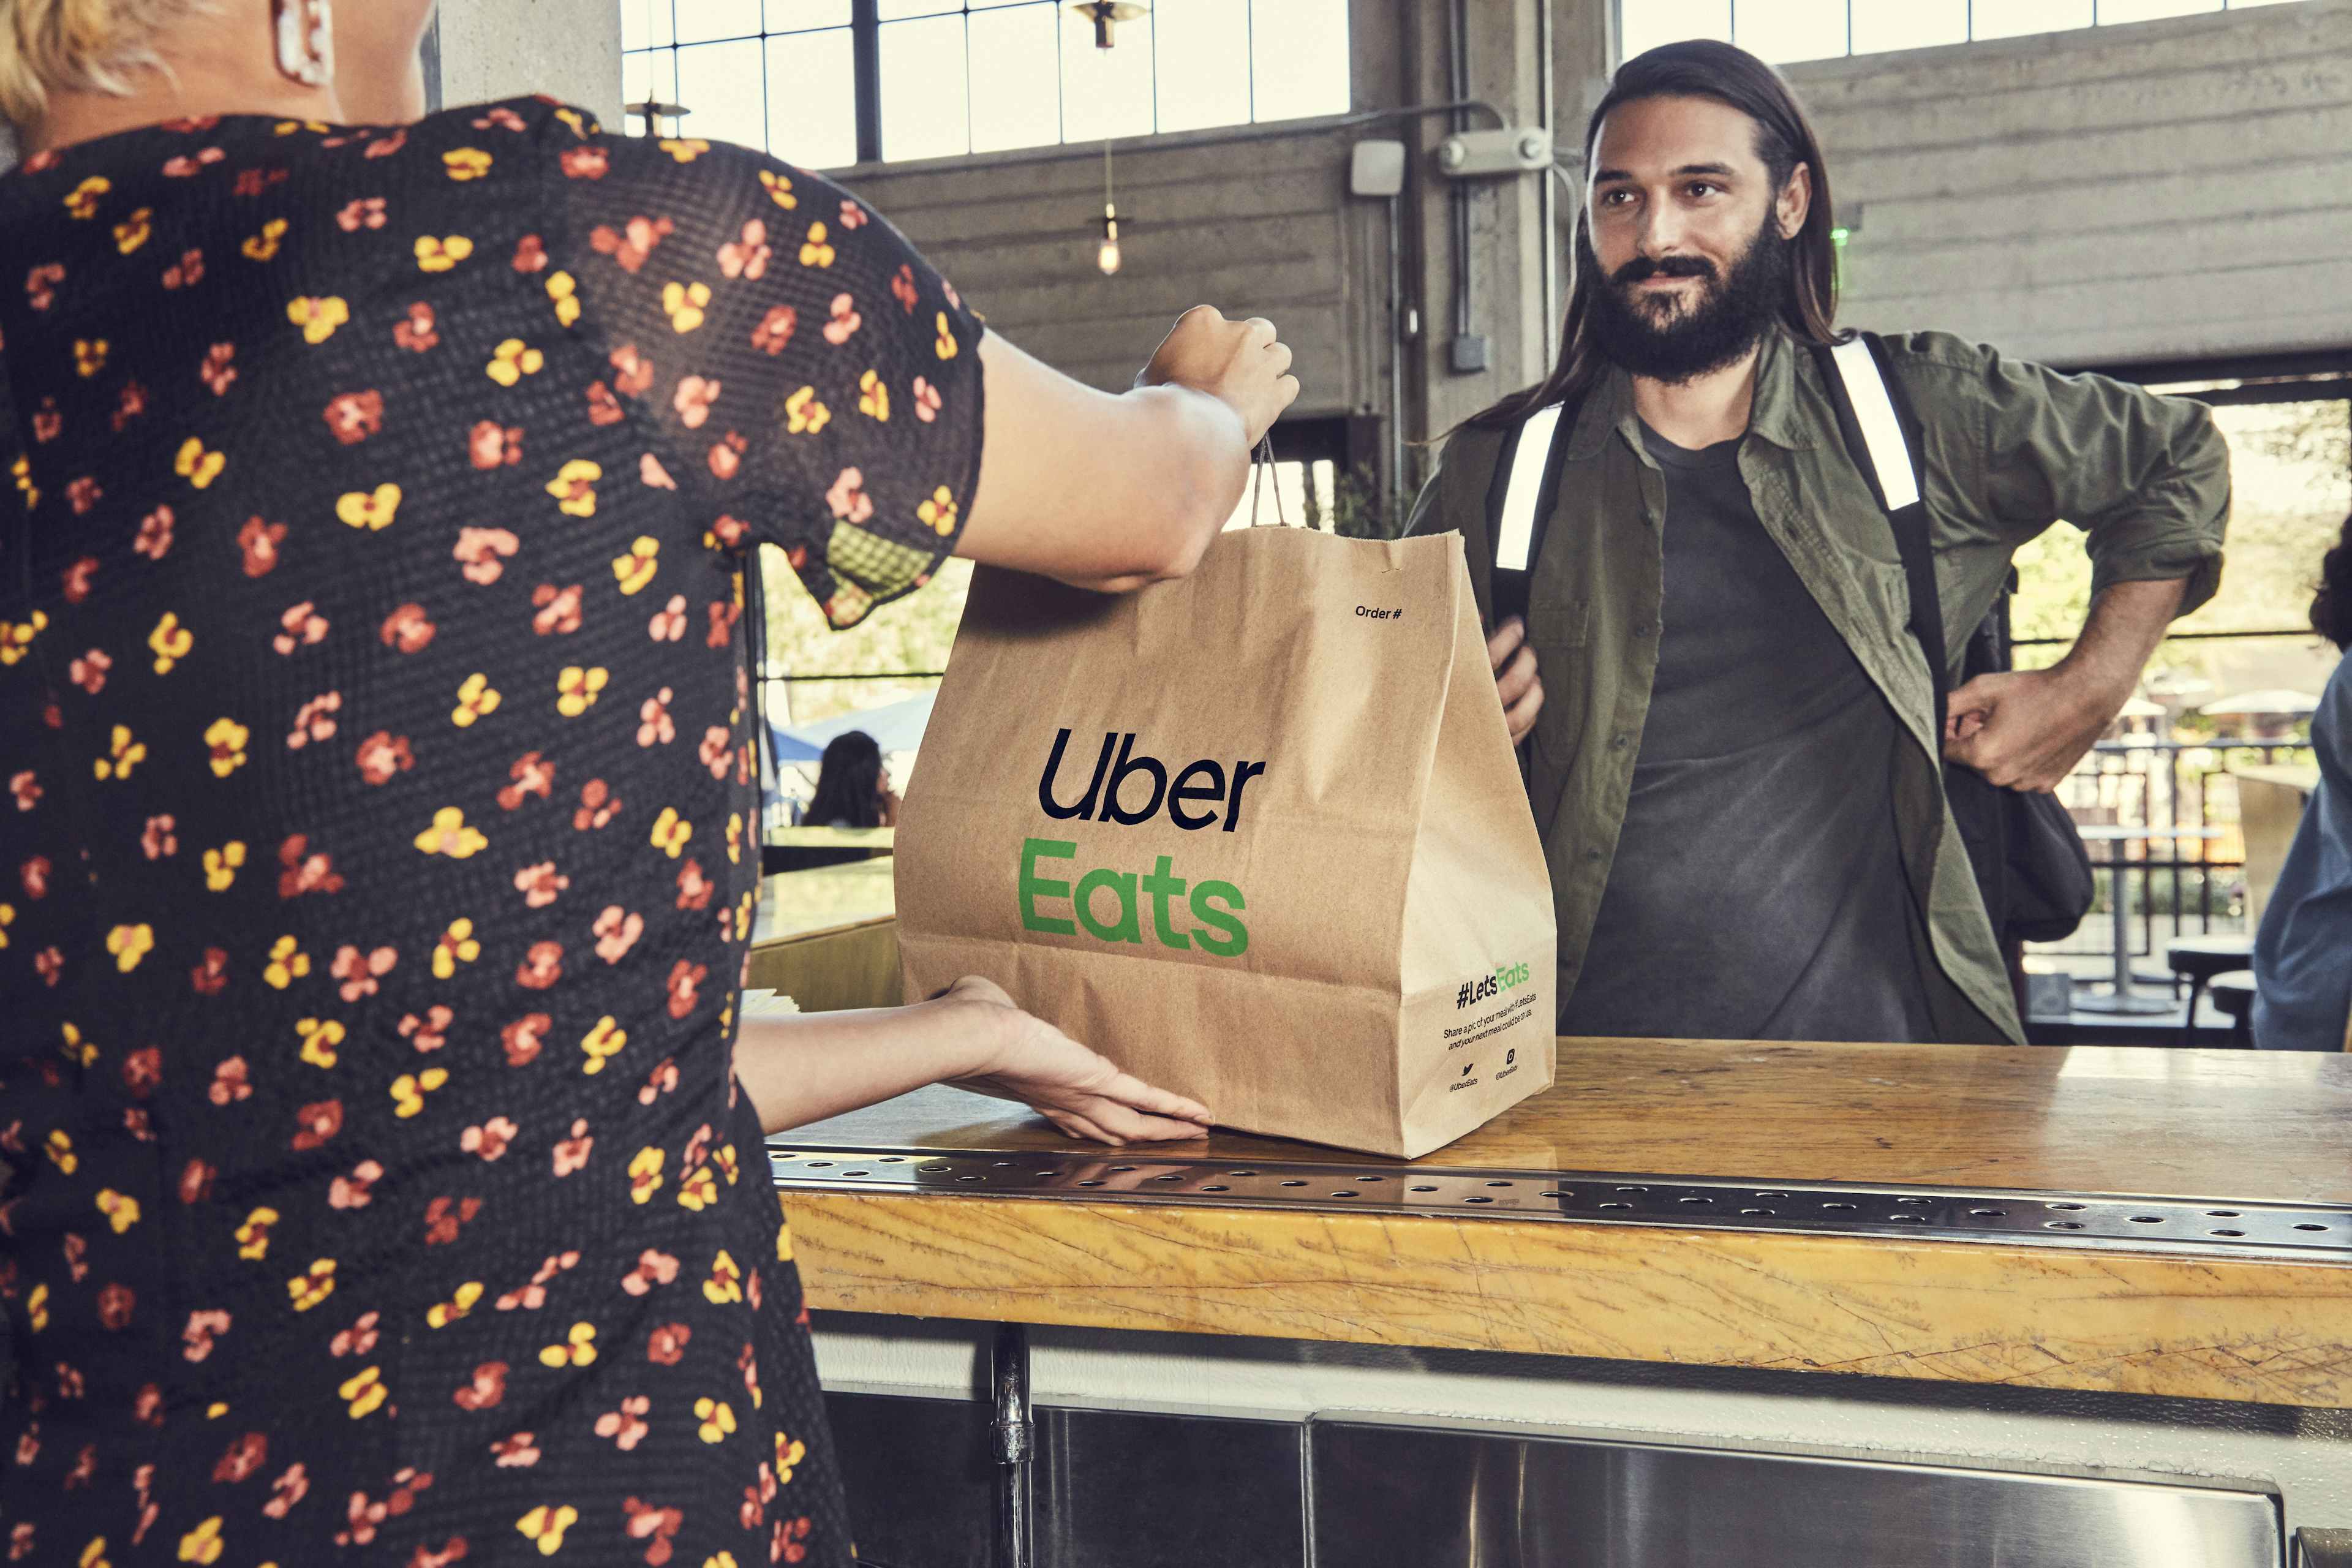 an Uber Eats delivery person picking up an order from a restaurant